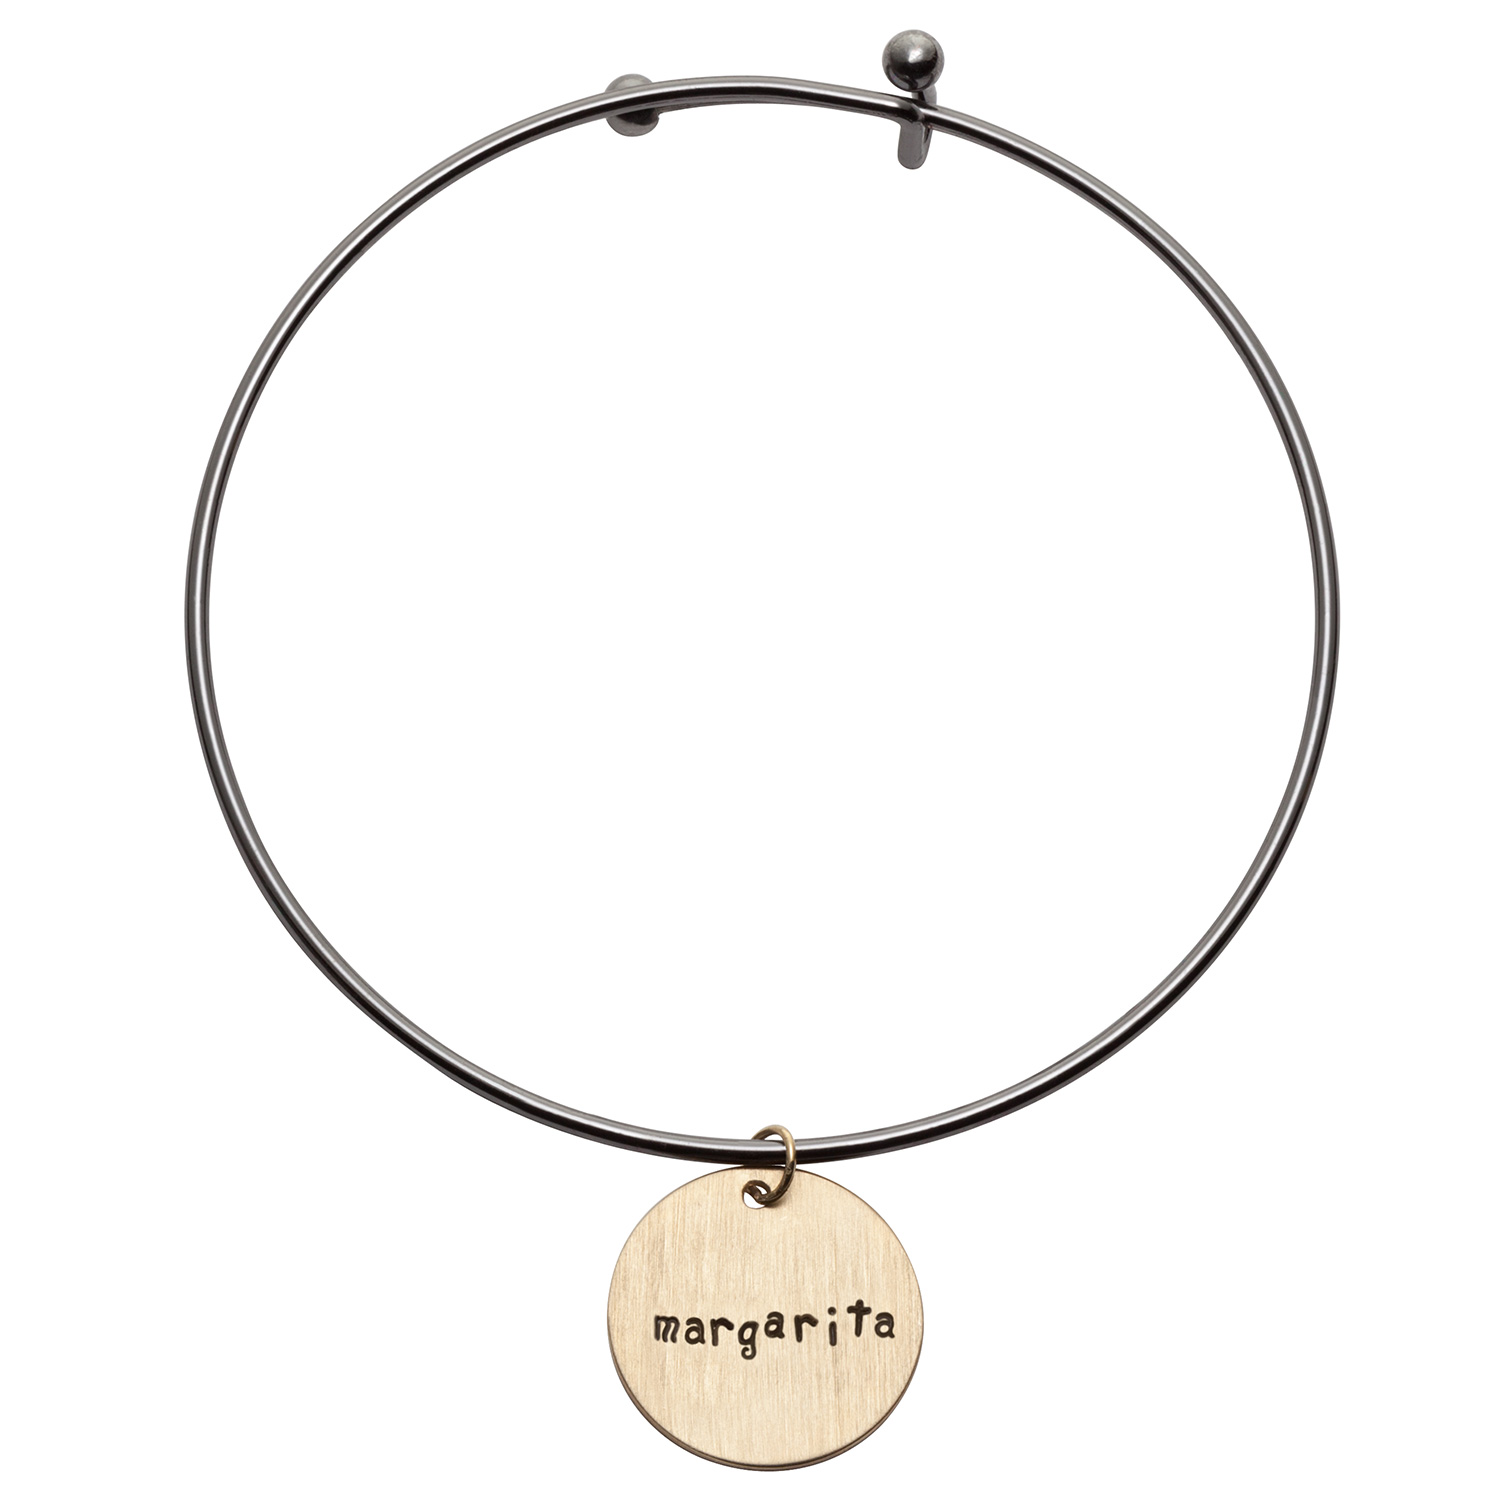 Expandable Bangle Bracelet with Personalized Sterling Silver Charm